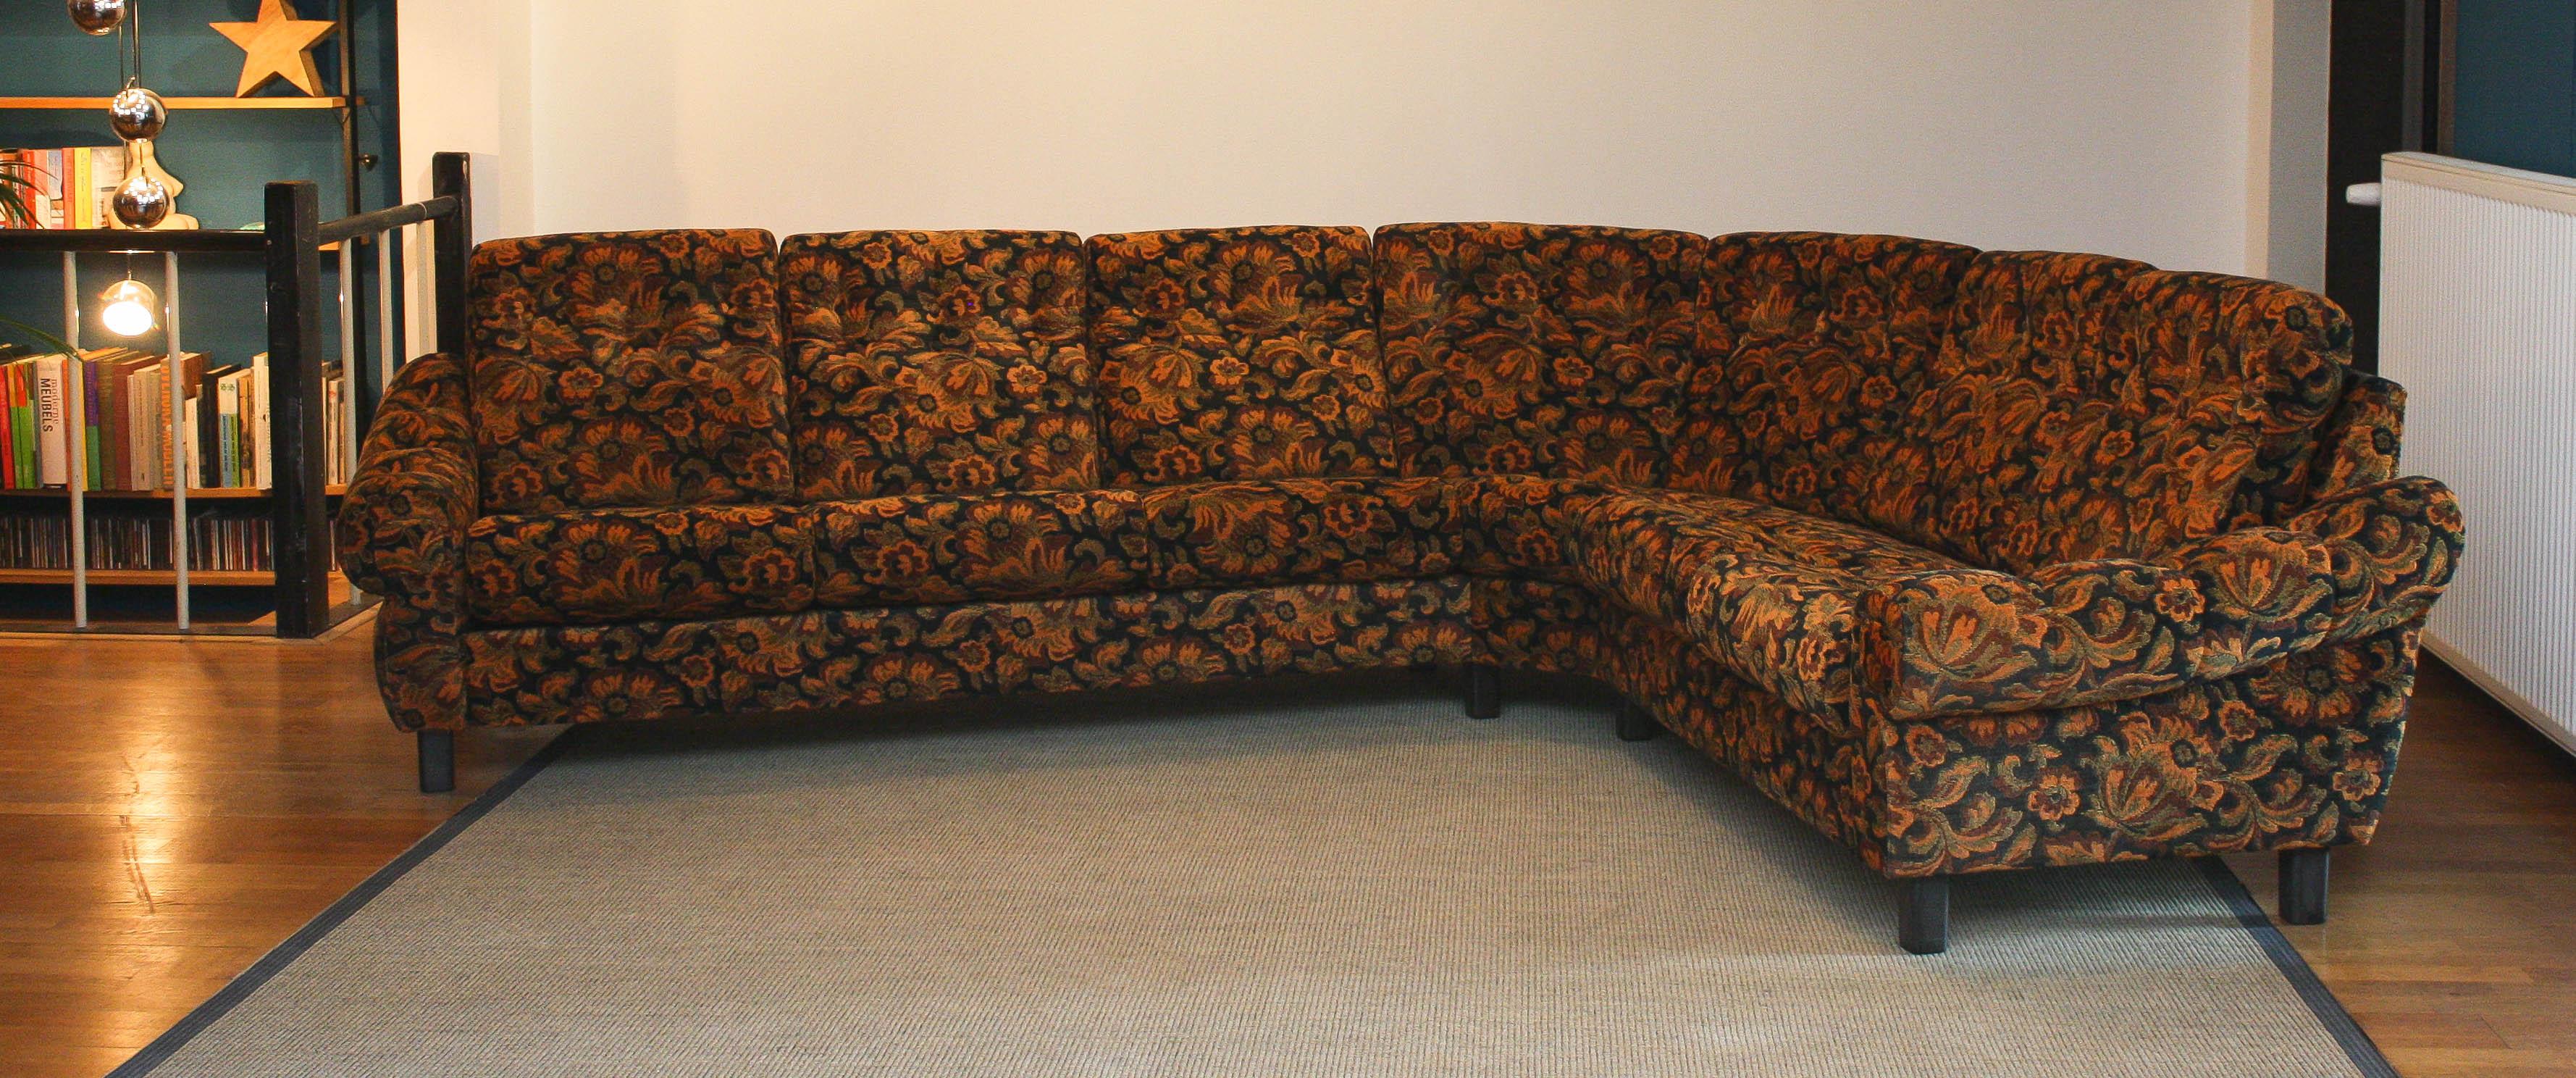 Beautiful eye catcher semi-modulair corner sofa in black / olive / brique jacquard fabric build by Broderna Andersson Industrier Ekenässjön in Sweden in overall very good and clean condition.
Extremely comfortable.
Sizes for the corner sofa are 118